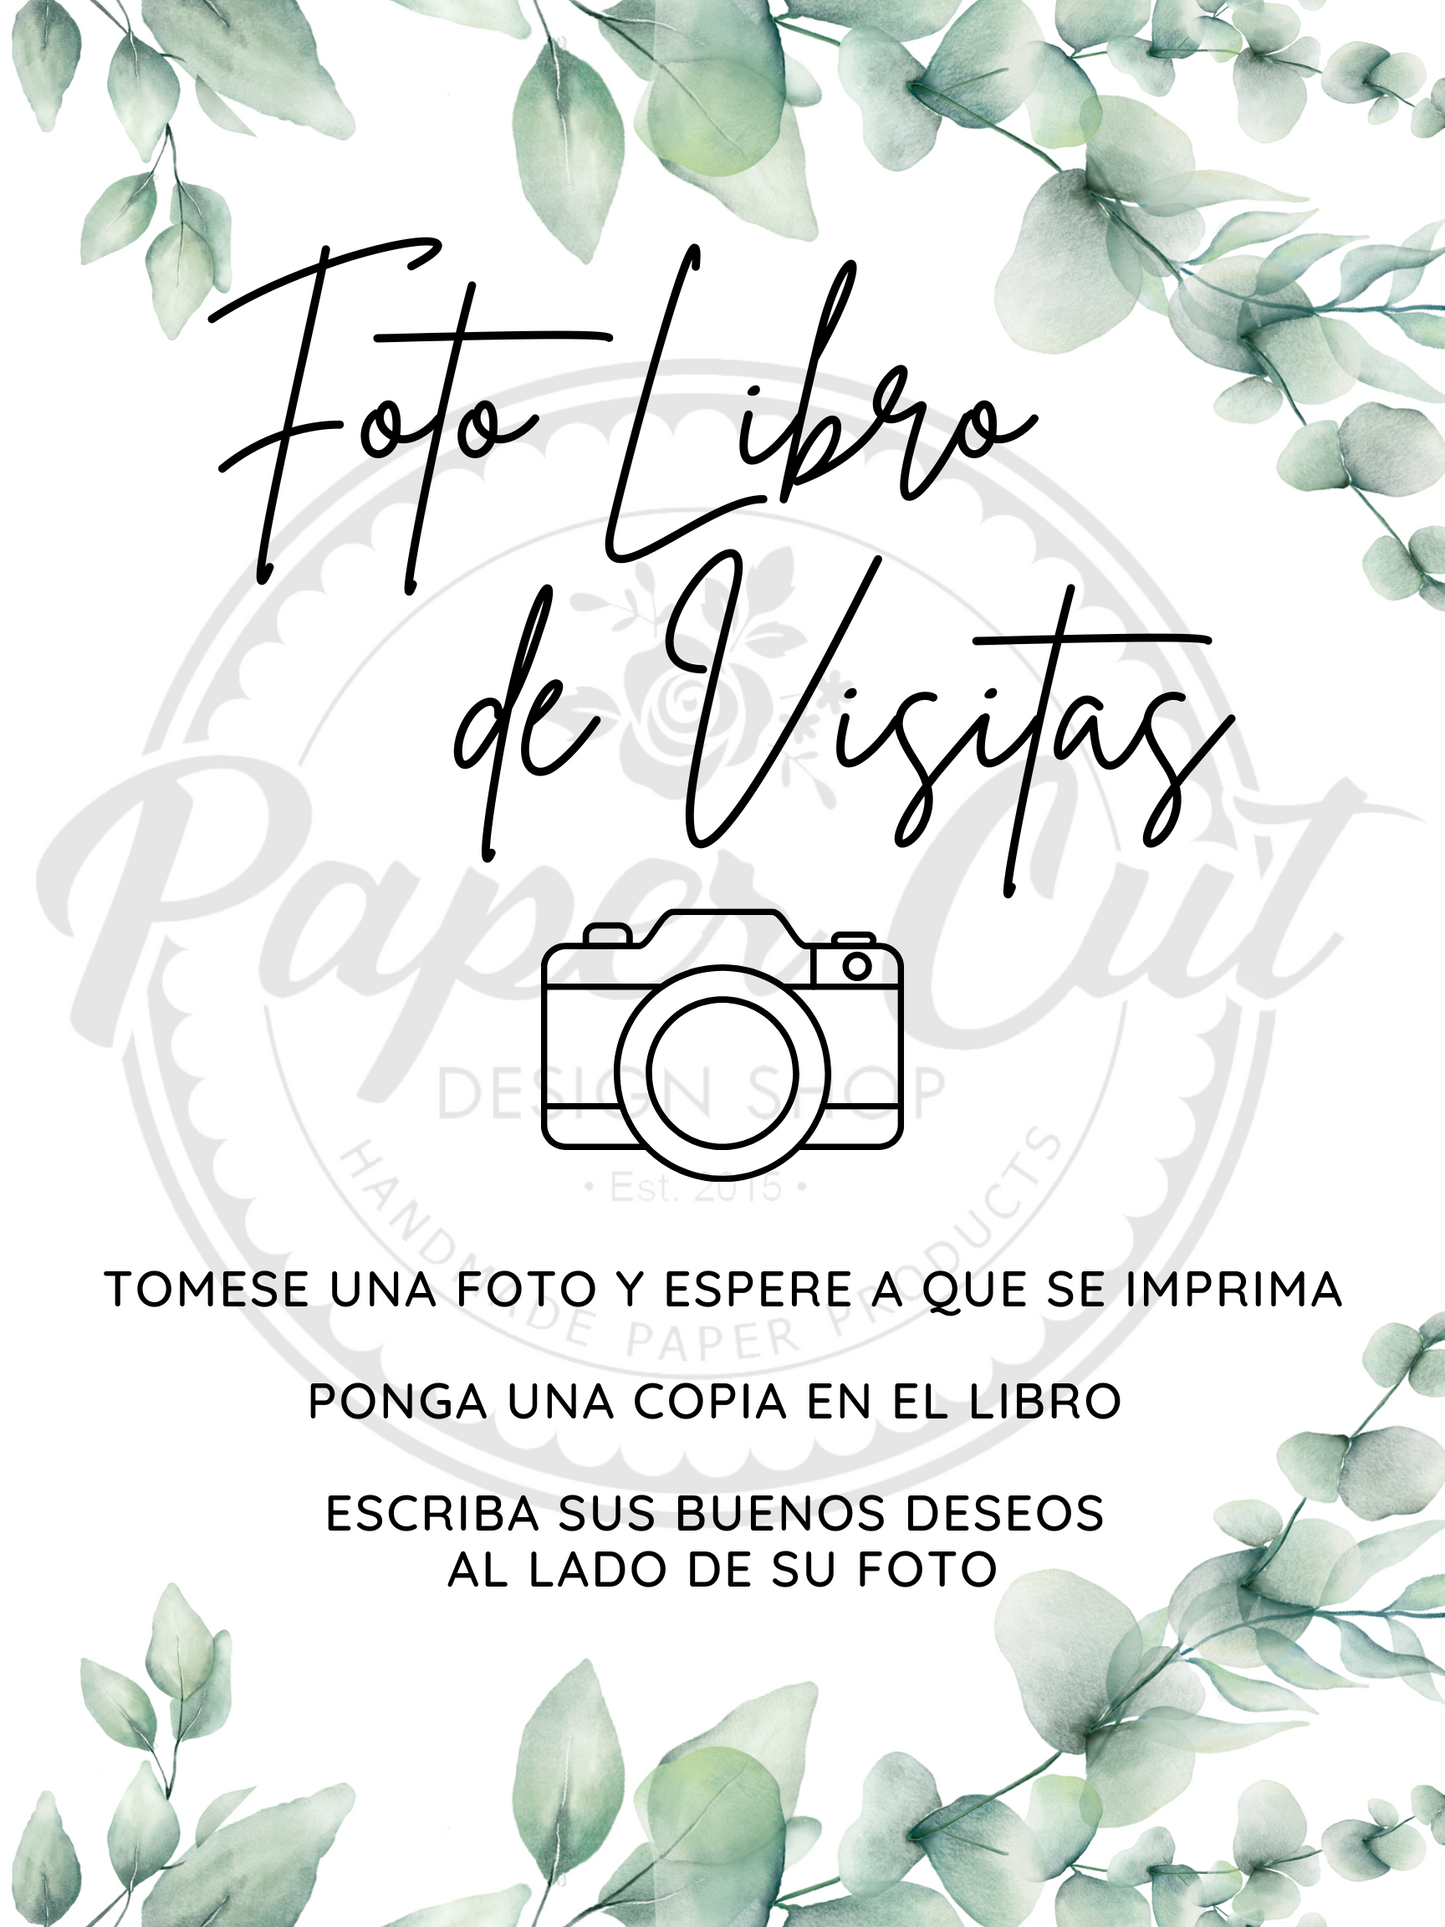 Photo Guestbook SPANISH Sign (Digital Download)